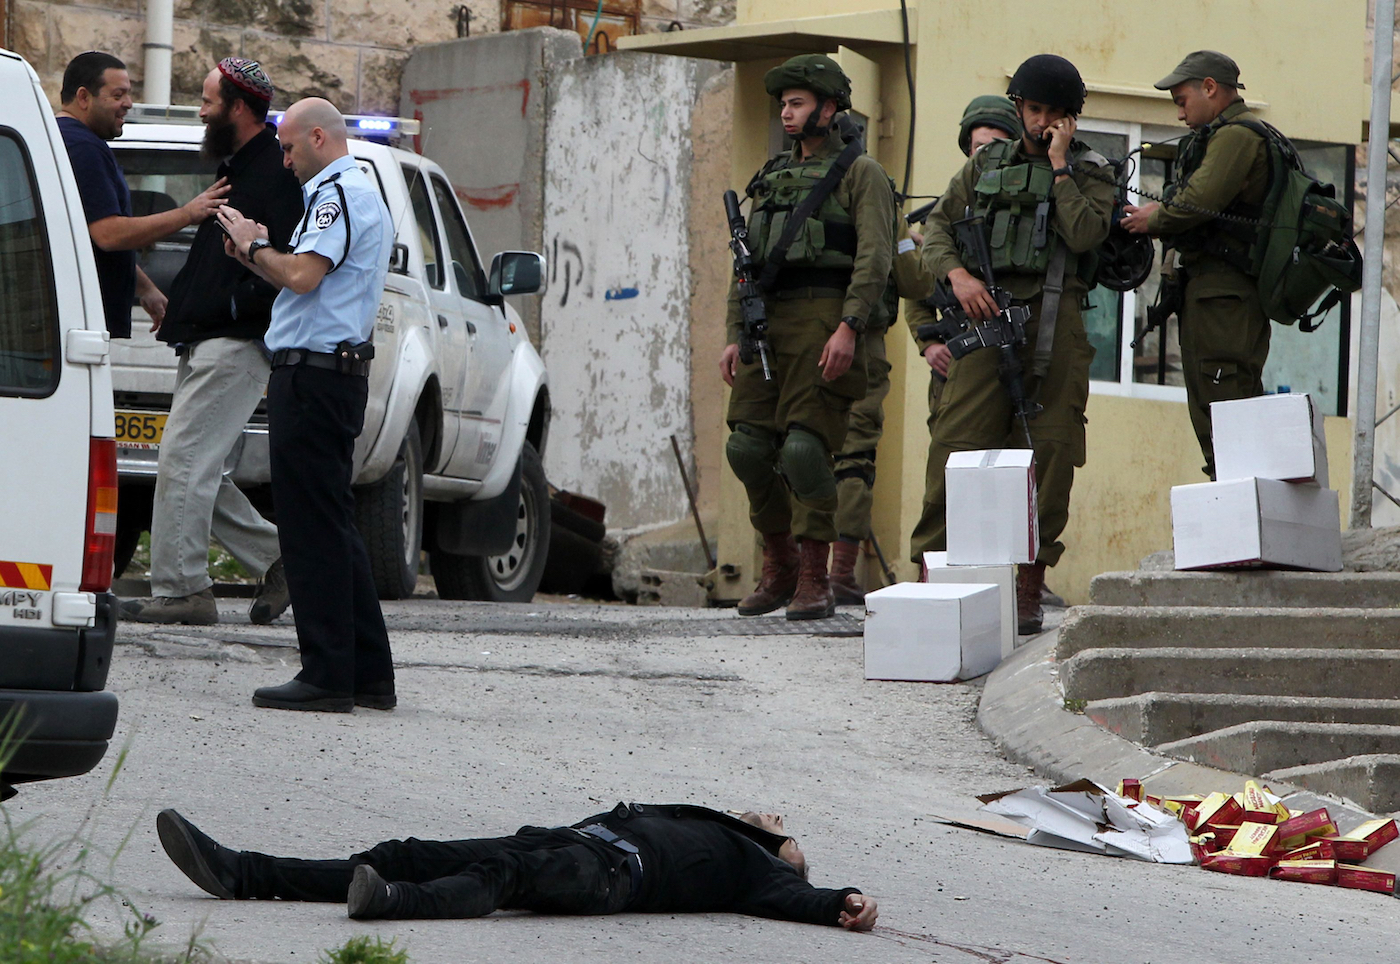 EDITORS NOTE: Graphic content / Israeli soldiers and police surround the body of one of two Palestinians who were killed after wounding an Israeli soldier in a knife attack before being shot dead by troops, an army spokeswoman said, at the entrance to the heavily guarded Jewish settler enclave of Tal Rumeda in the city centre of the West Bank town of Hebron on March 24, 2016. An Israeli soldier was detained after allegedly shooting a wounded Palestinian assailant in the head and killing him as he lay on the ground, the army said. In the video released by B'Tselem, an Israeli rights non-governmental organisation, the soldier appears to shoot the Palestinian again in the head without provocation as he lay wounded from a gun shot wound on the ground.    / AFP / HAZEM BADER        (Photo credit should read HAZEM BADER/AFP/Getty Images)